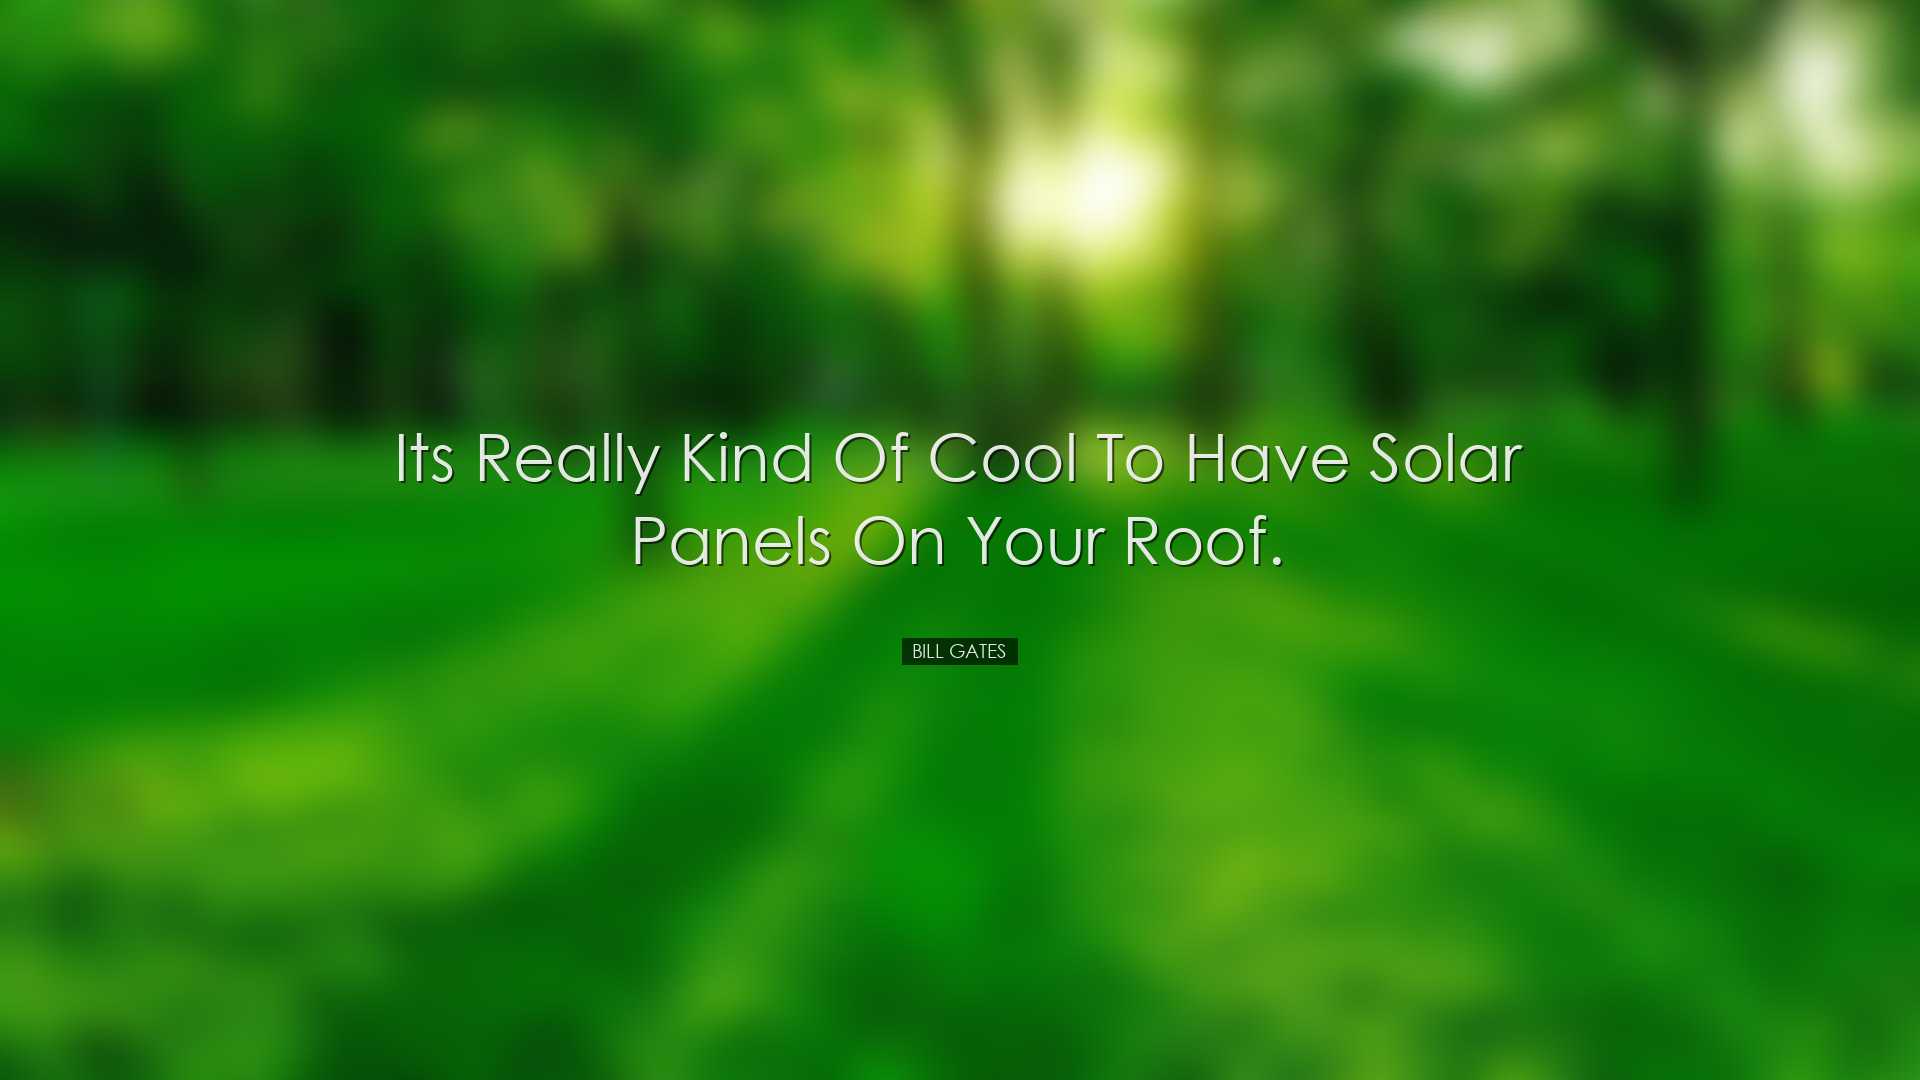 Its really kind of cool to have solar panels on your roof. - Bill